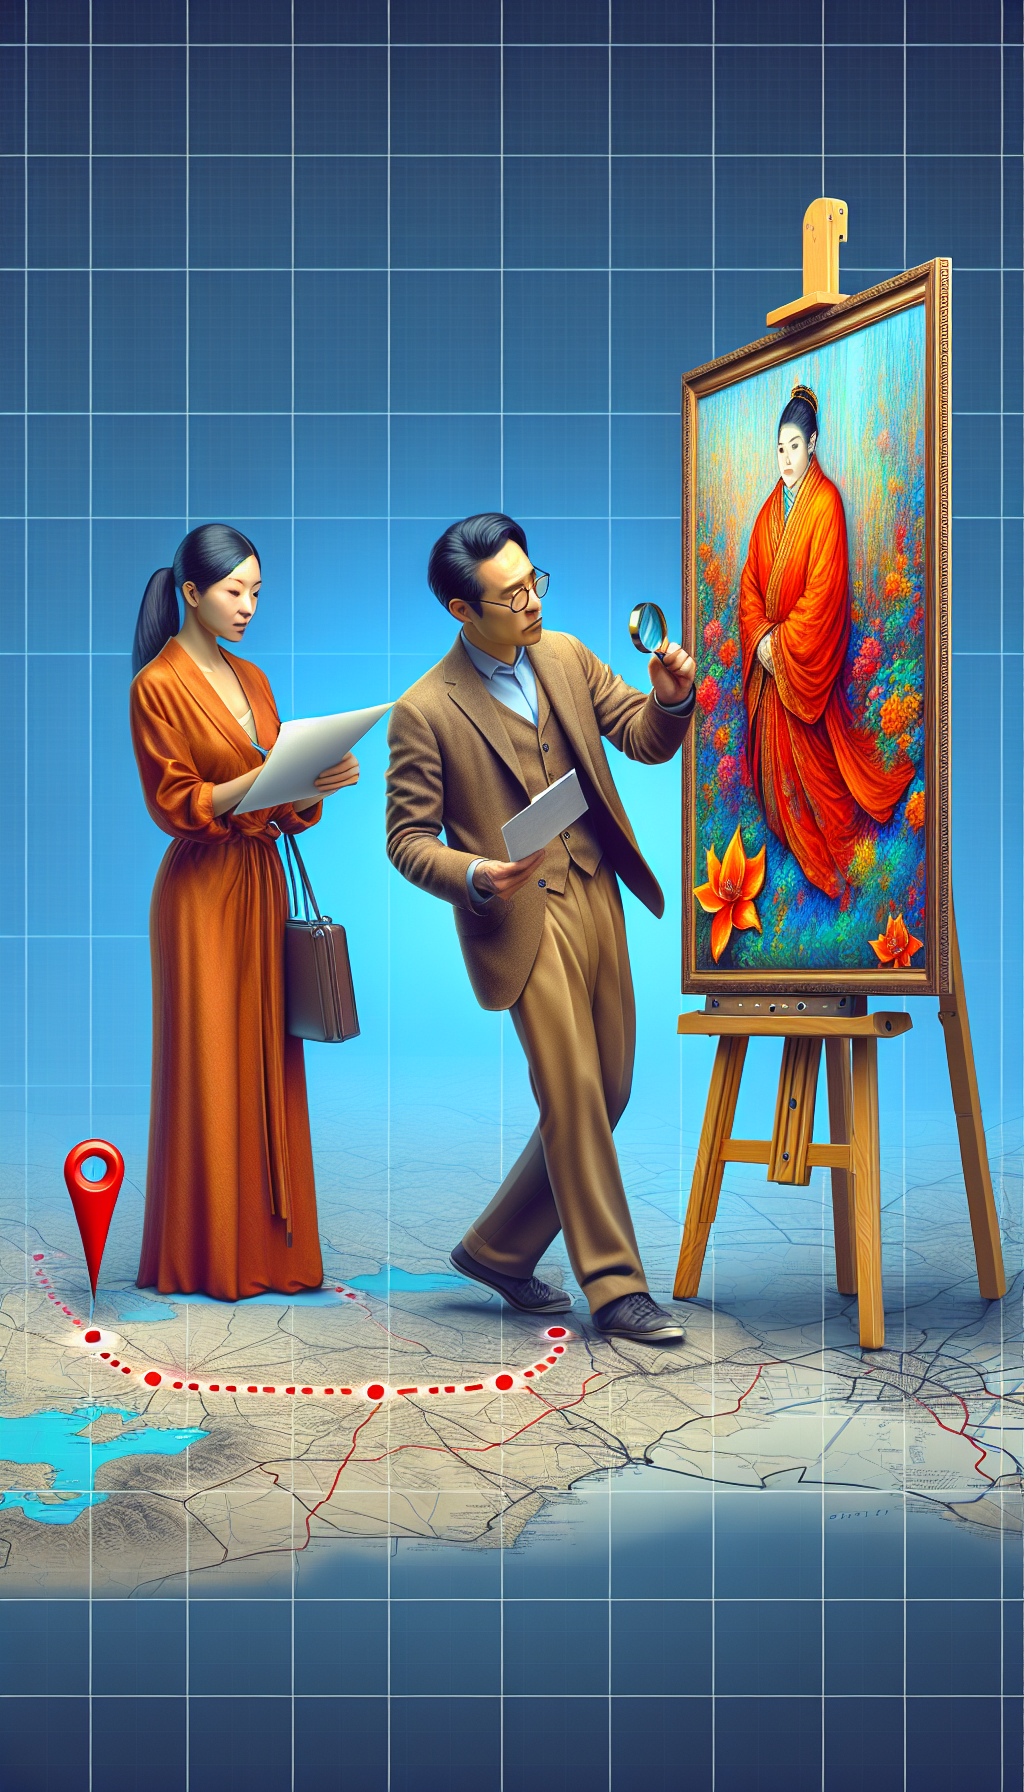 An art expert, with a magnifying glass in one hand, examines a vibrant painting on an easel while a curious collector looks on. A dotted line connects a map pin labeled "You" to the appraisal scene, creating the feel of a treasure map, showcasing the journey to an expert 'nearby'. The styles vary from realistic characters to a simplistic, symbolic map.